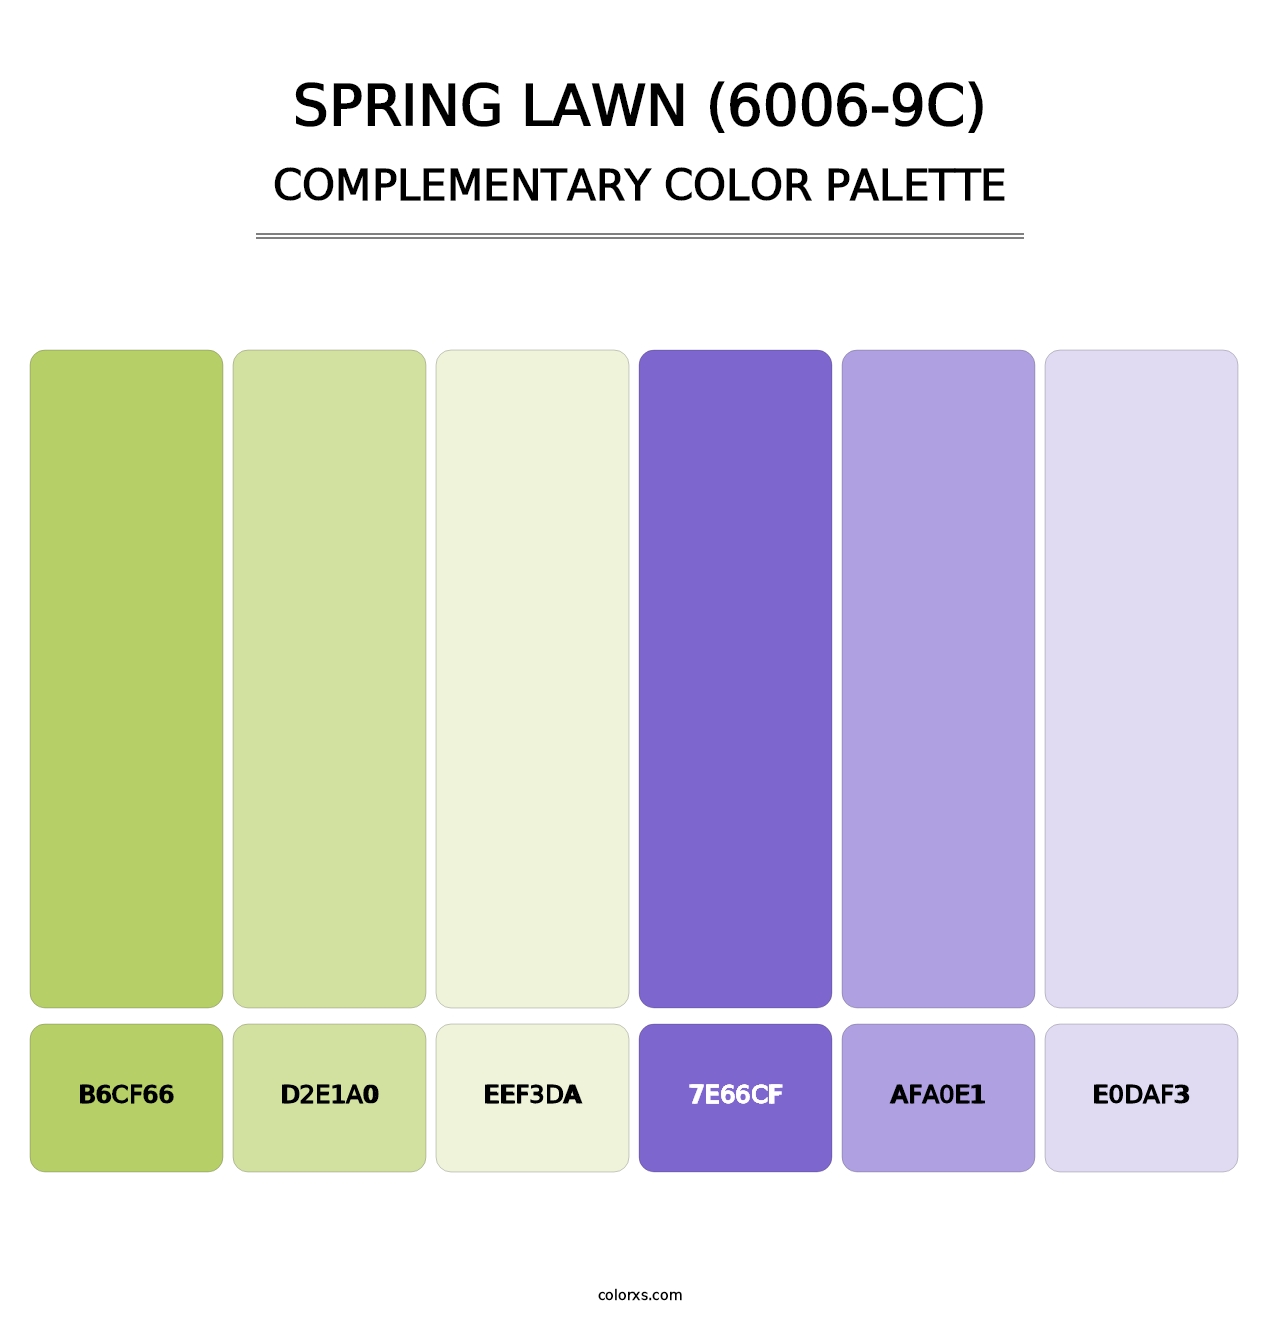 Spring Lawn (6006-9C) - Complementary Color Palette